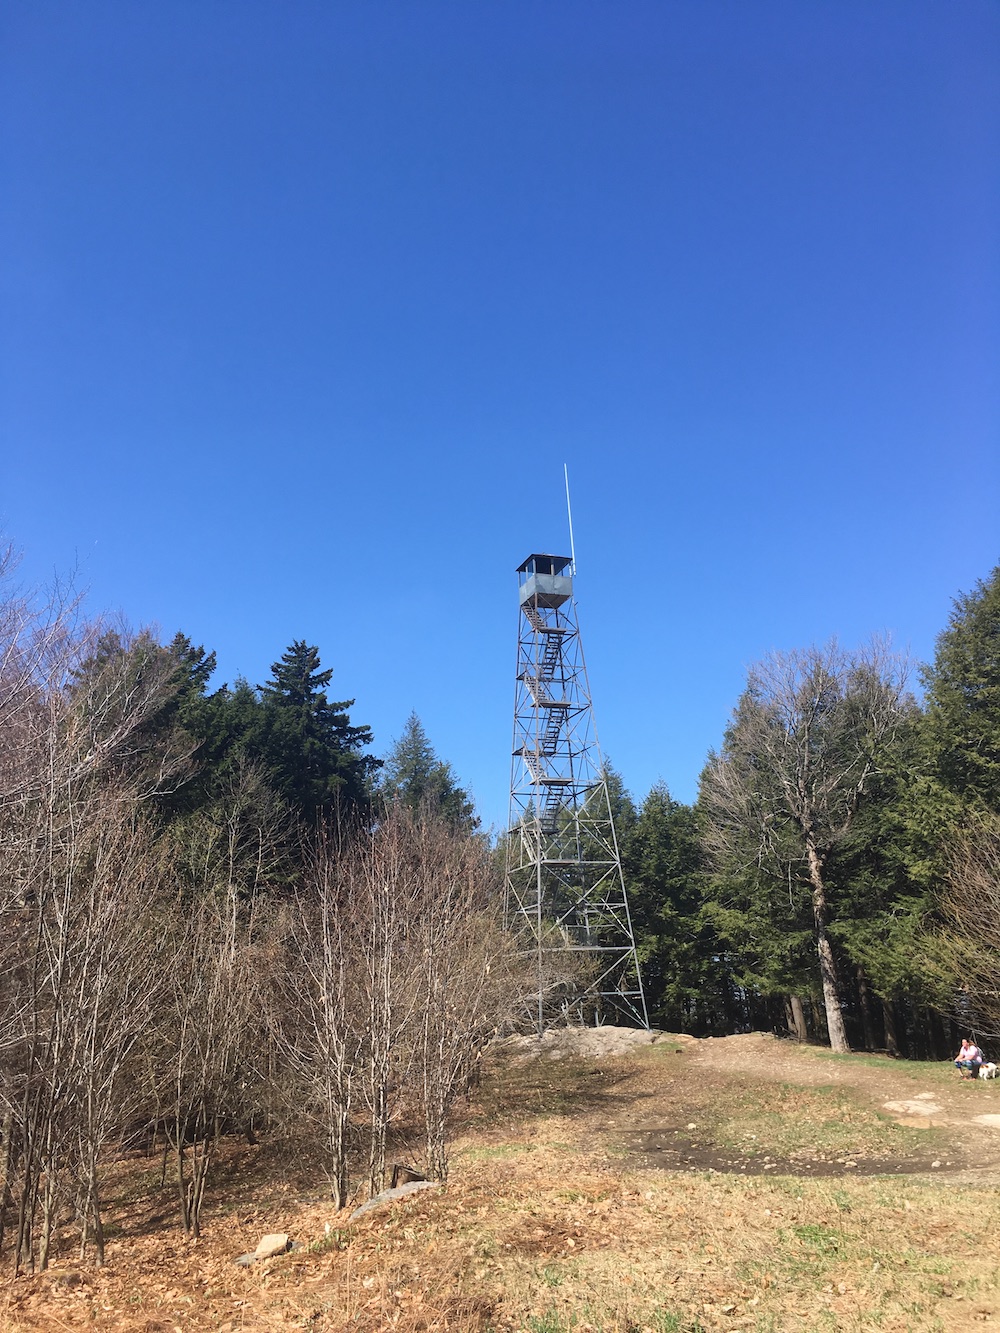 Approaching the fire tower